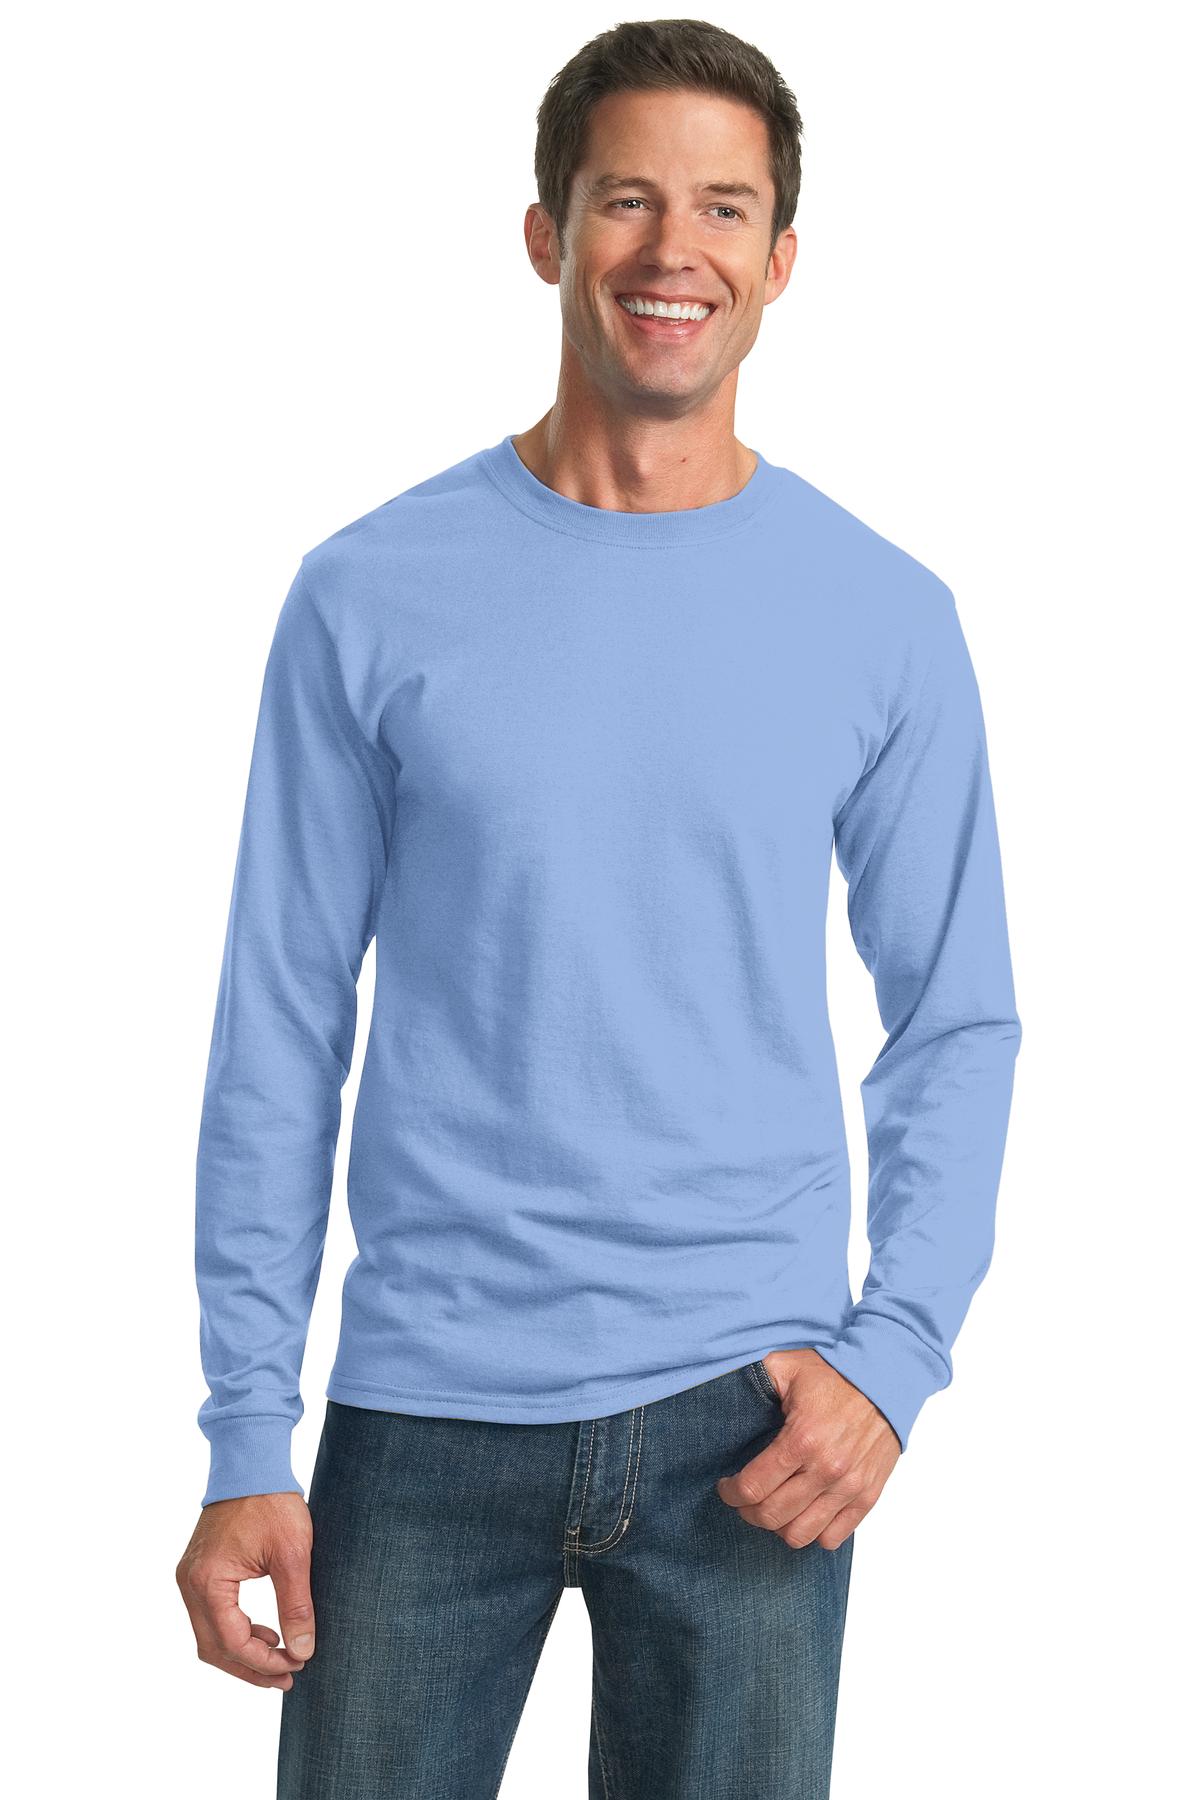 JERZEES - Dri-Power Fifty-fifty Cotton-Poly Long Sleeve T-Shirt.  29LS